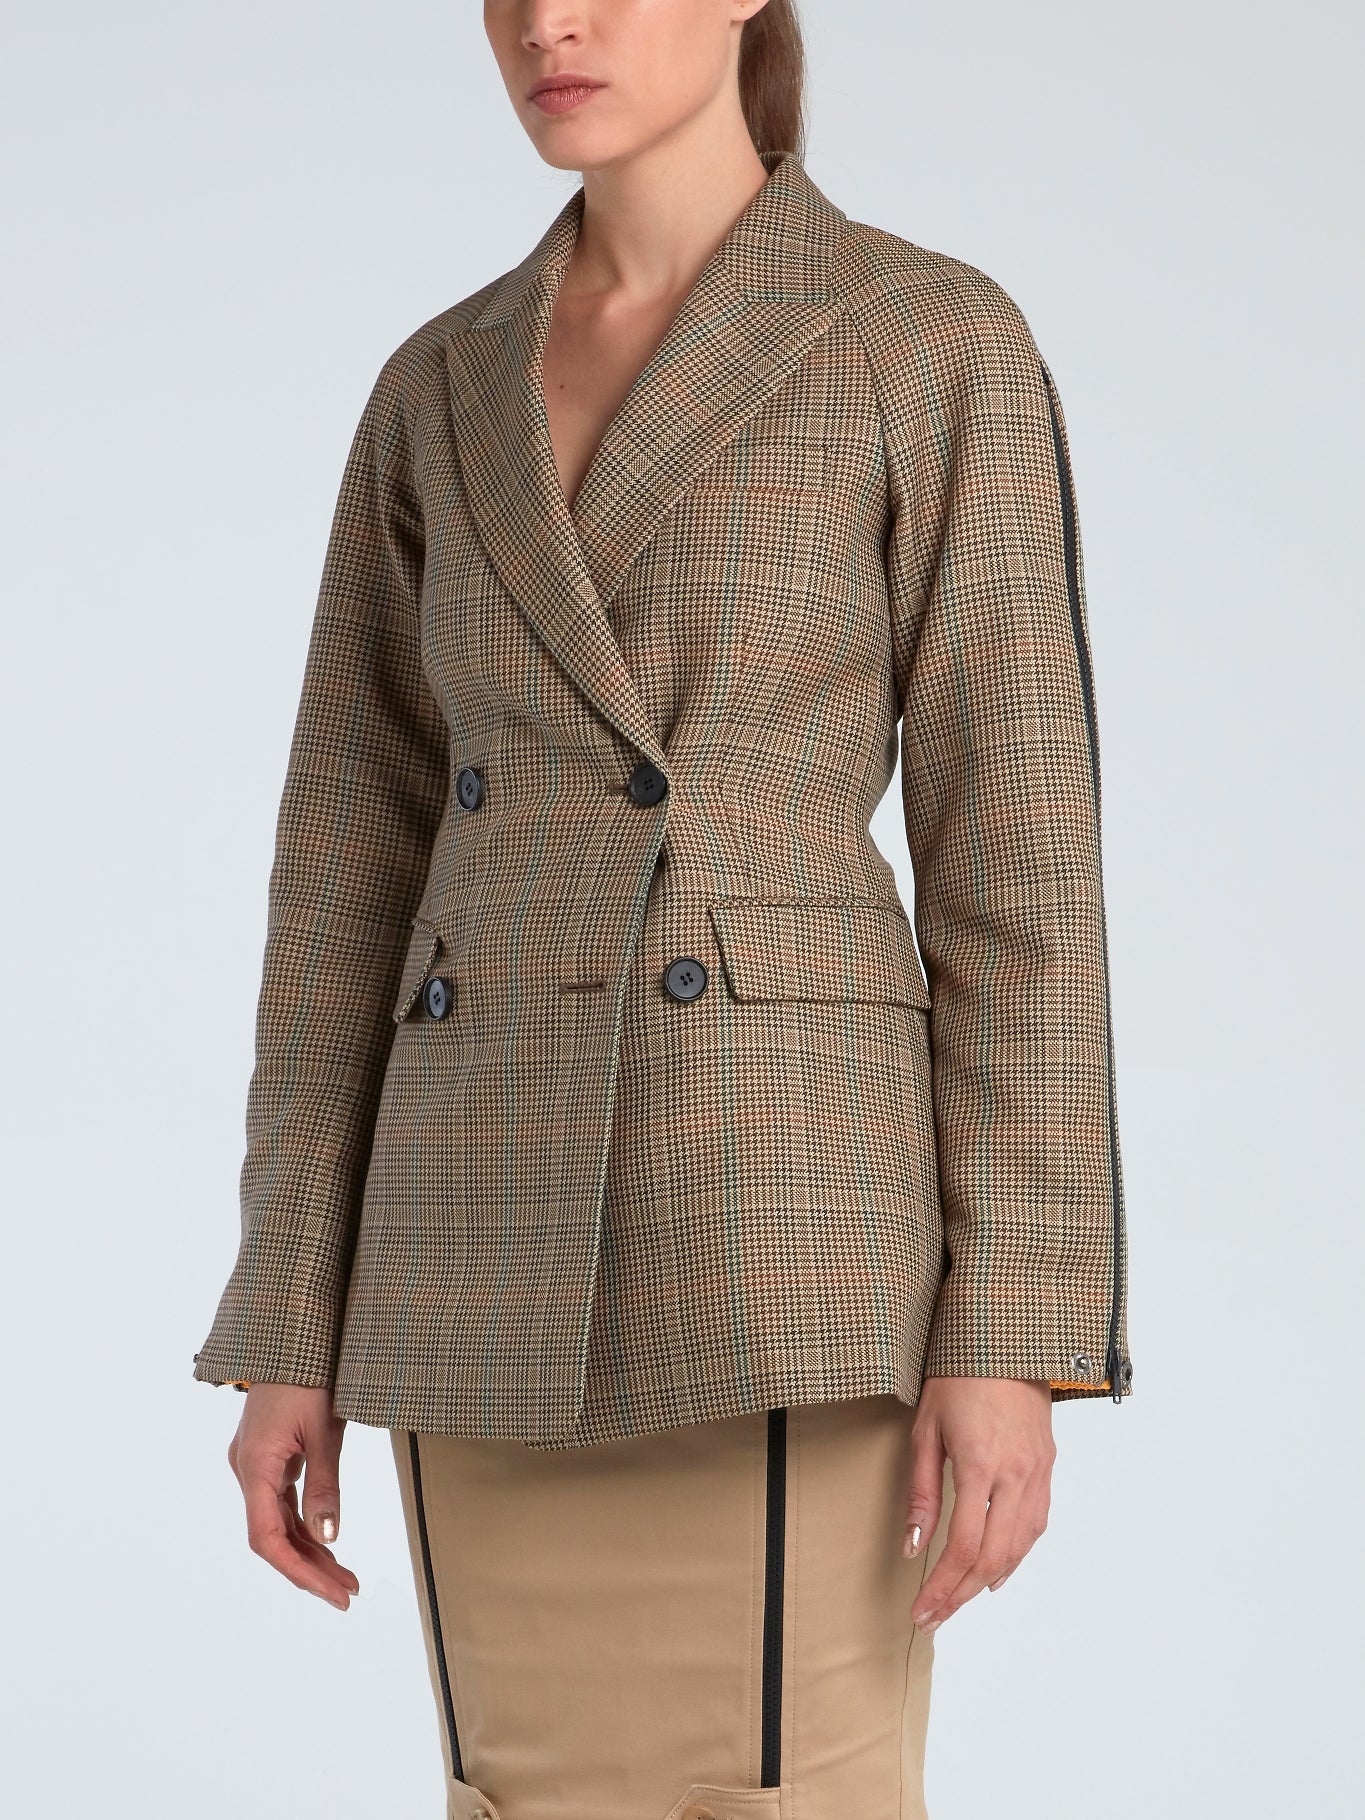 Double-Breasted Zip Sleeve Check Jacket